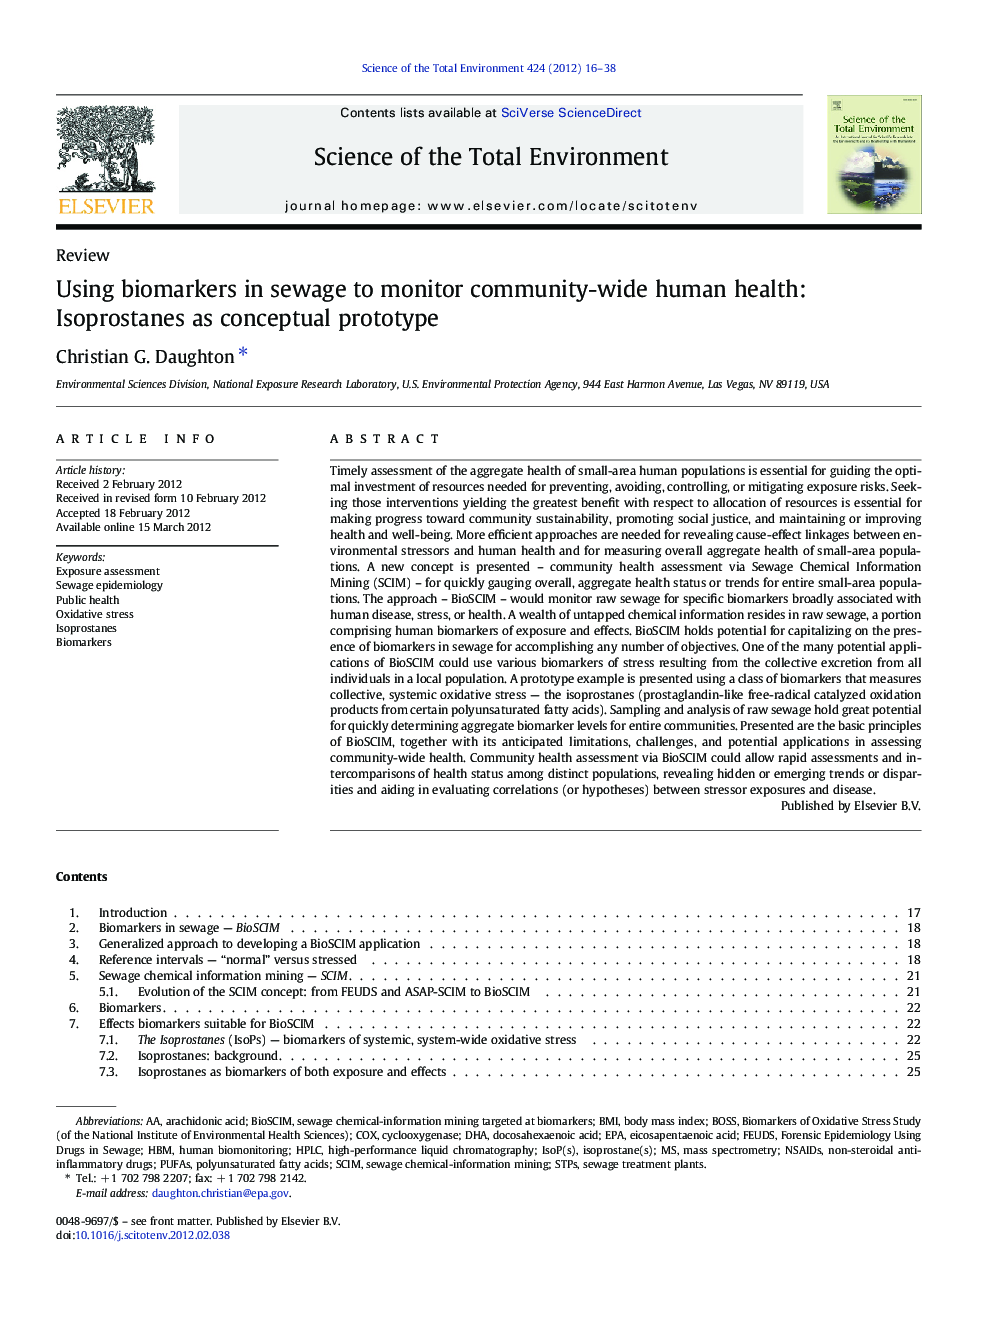 Using biomarkers in sewage to monitor community-wide human health: Isoprostanes as conceptual prototype